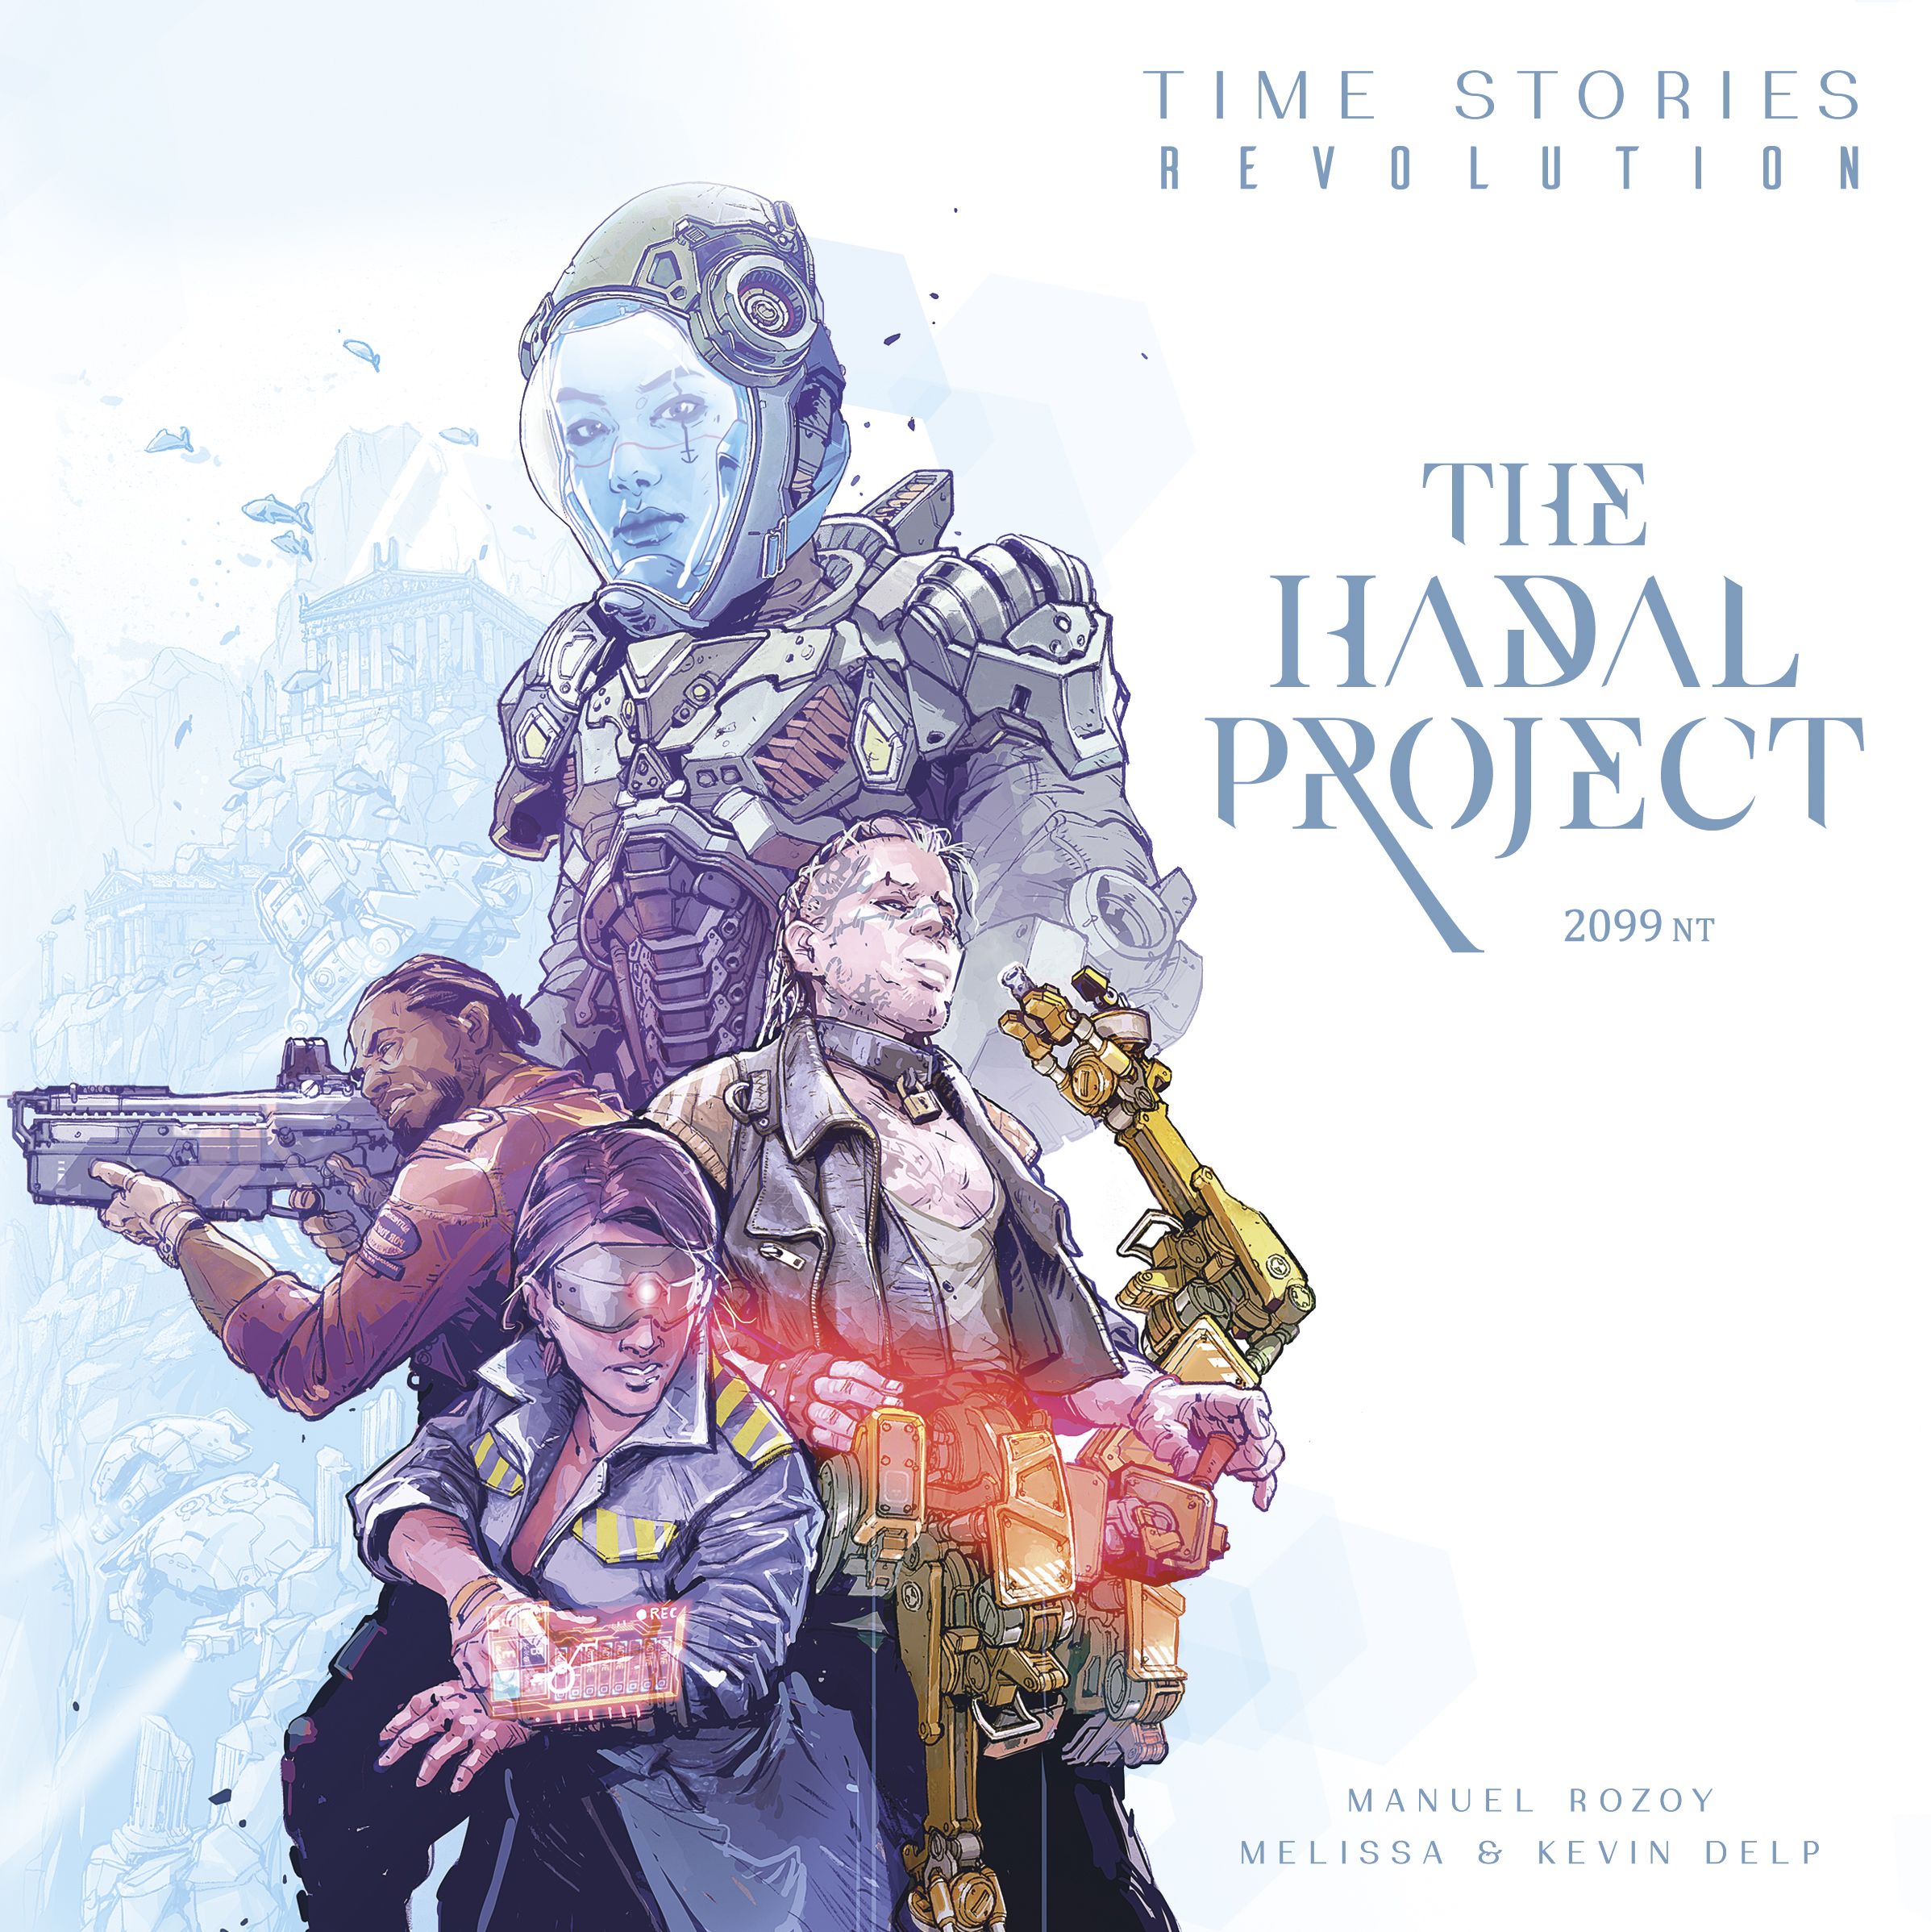 T.I.M.E. Stories révolution : The Hadal Project